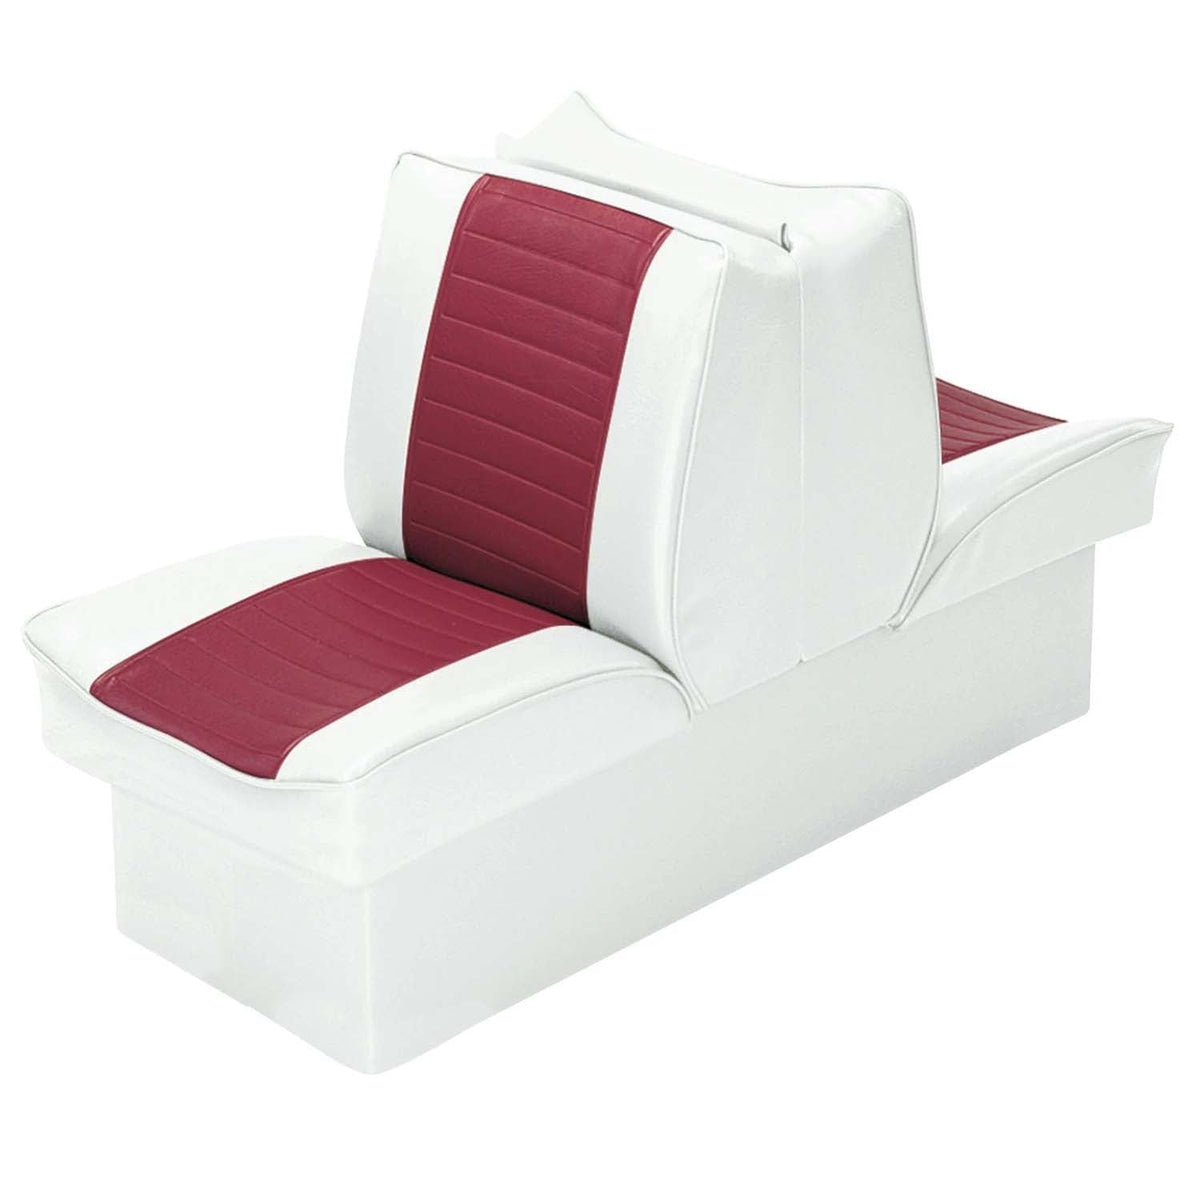 Wise Oversized - Not Qualified for Free Shipping Wise Lounge Seat Deluxe Plus White-Red #8WD521P-1-925